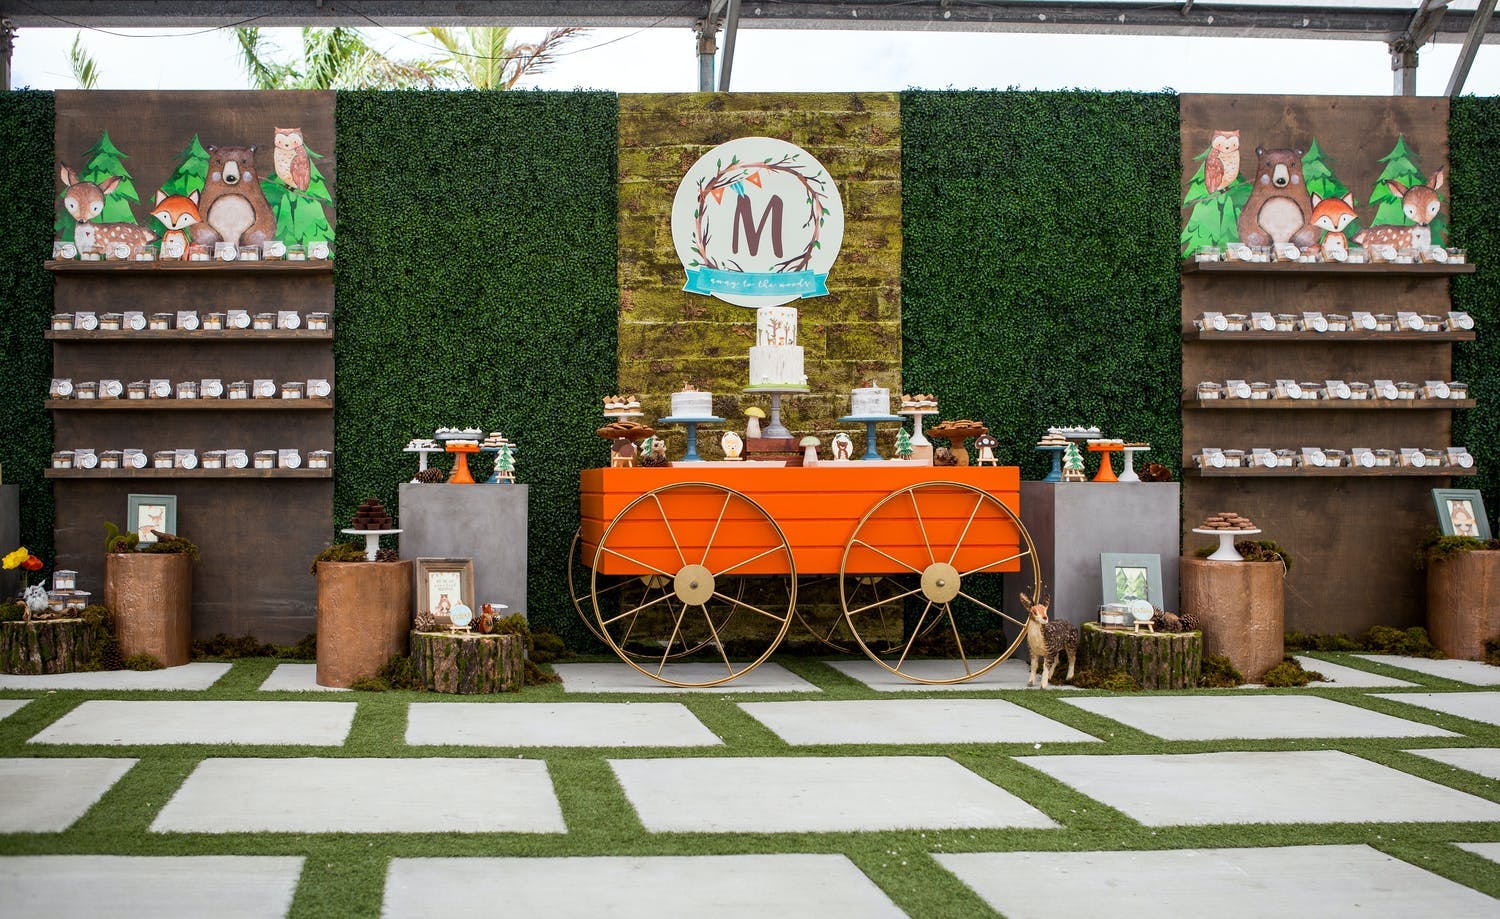 Forest-Themed Baby Shower With Boxwood Backdrop and Orange Wagon Dessert Station | PartySlate